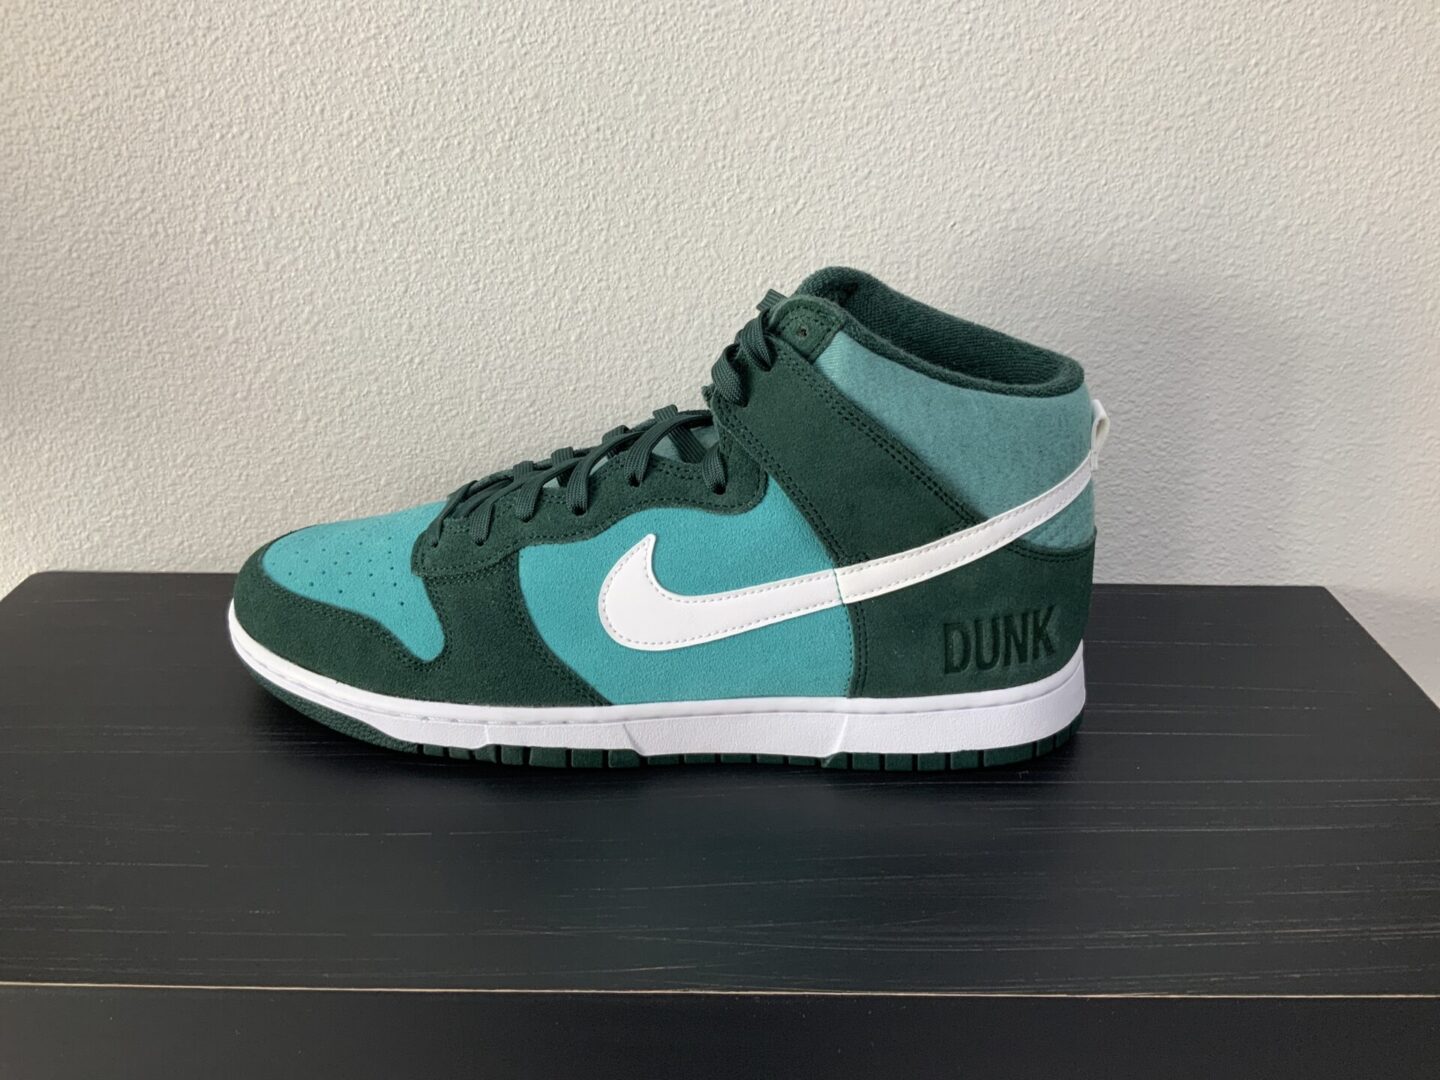 A single teal and white High top Dunk SE (Athletic Club - Pro Green) sneaker displayed on a black shelf against a neutral background.